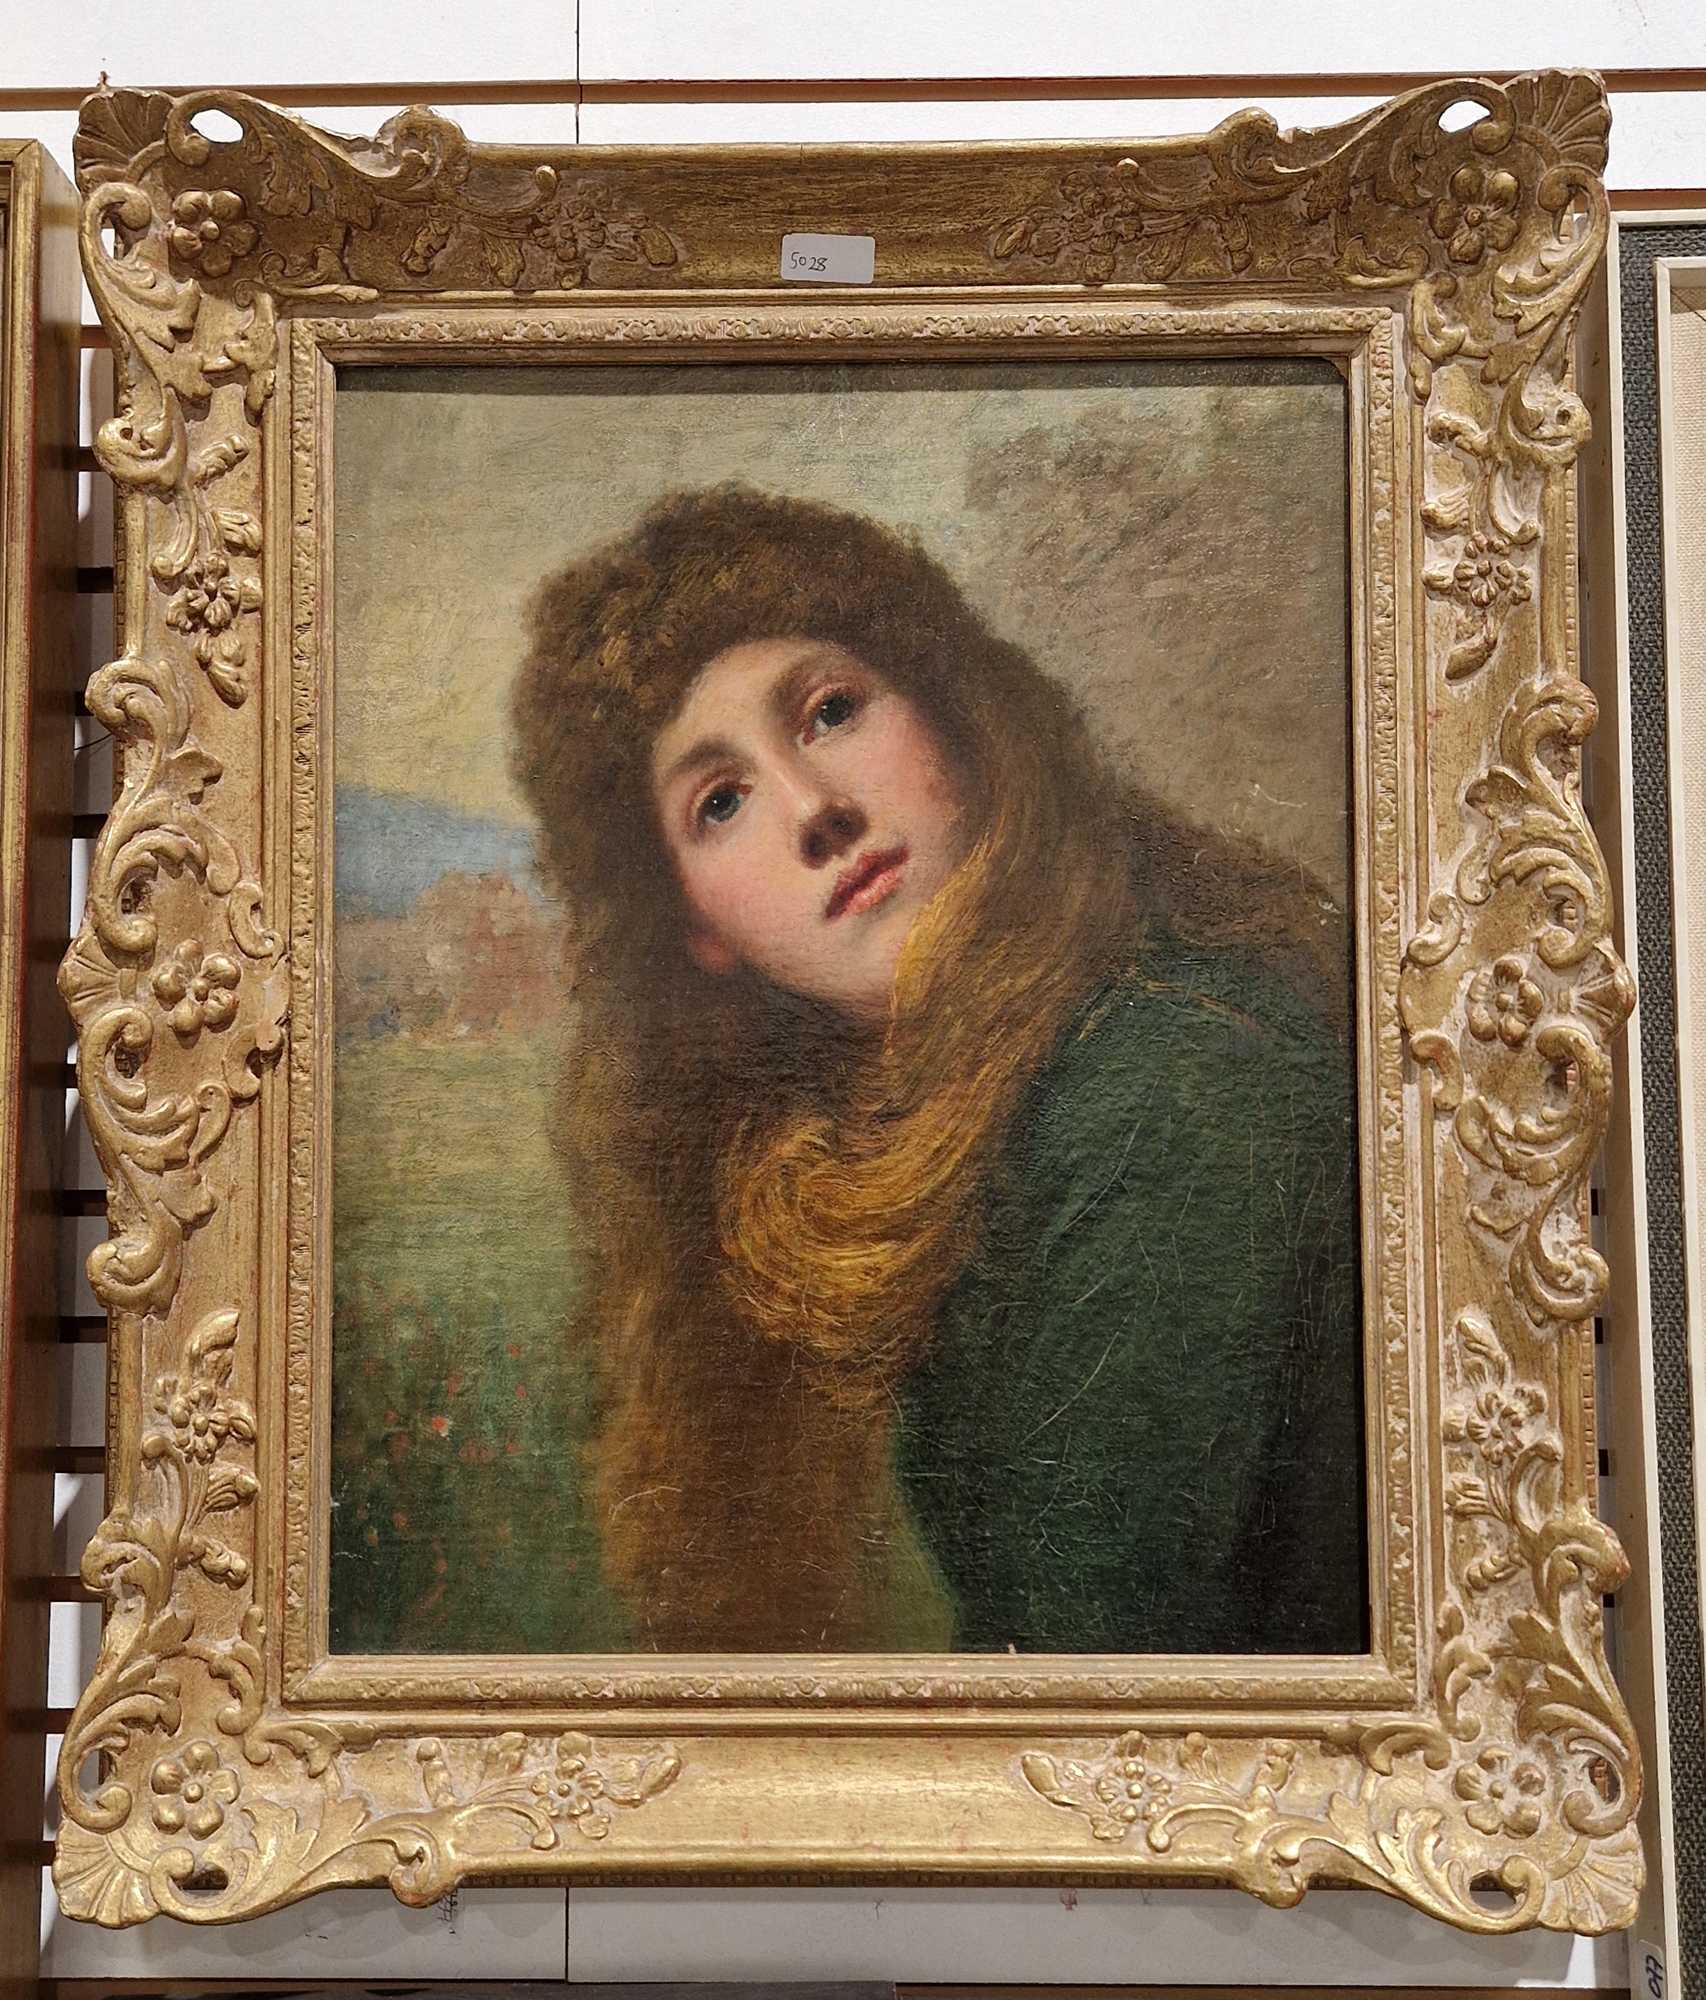 Late 19th century British School Oil on canvas Portrait of a young woman with windswept red hair - Image 2 of 12